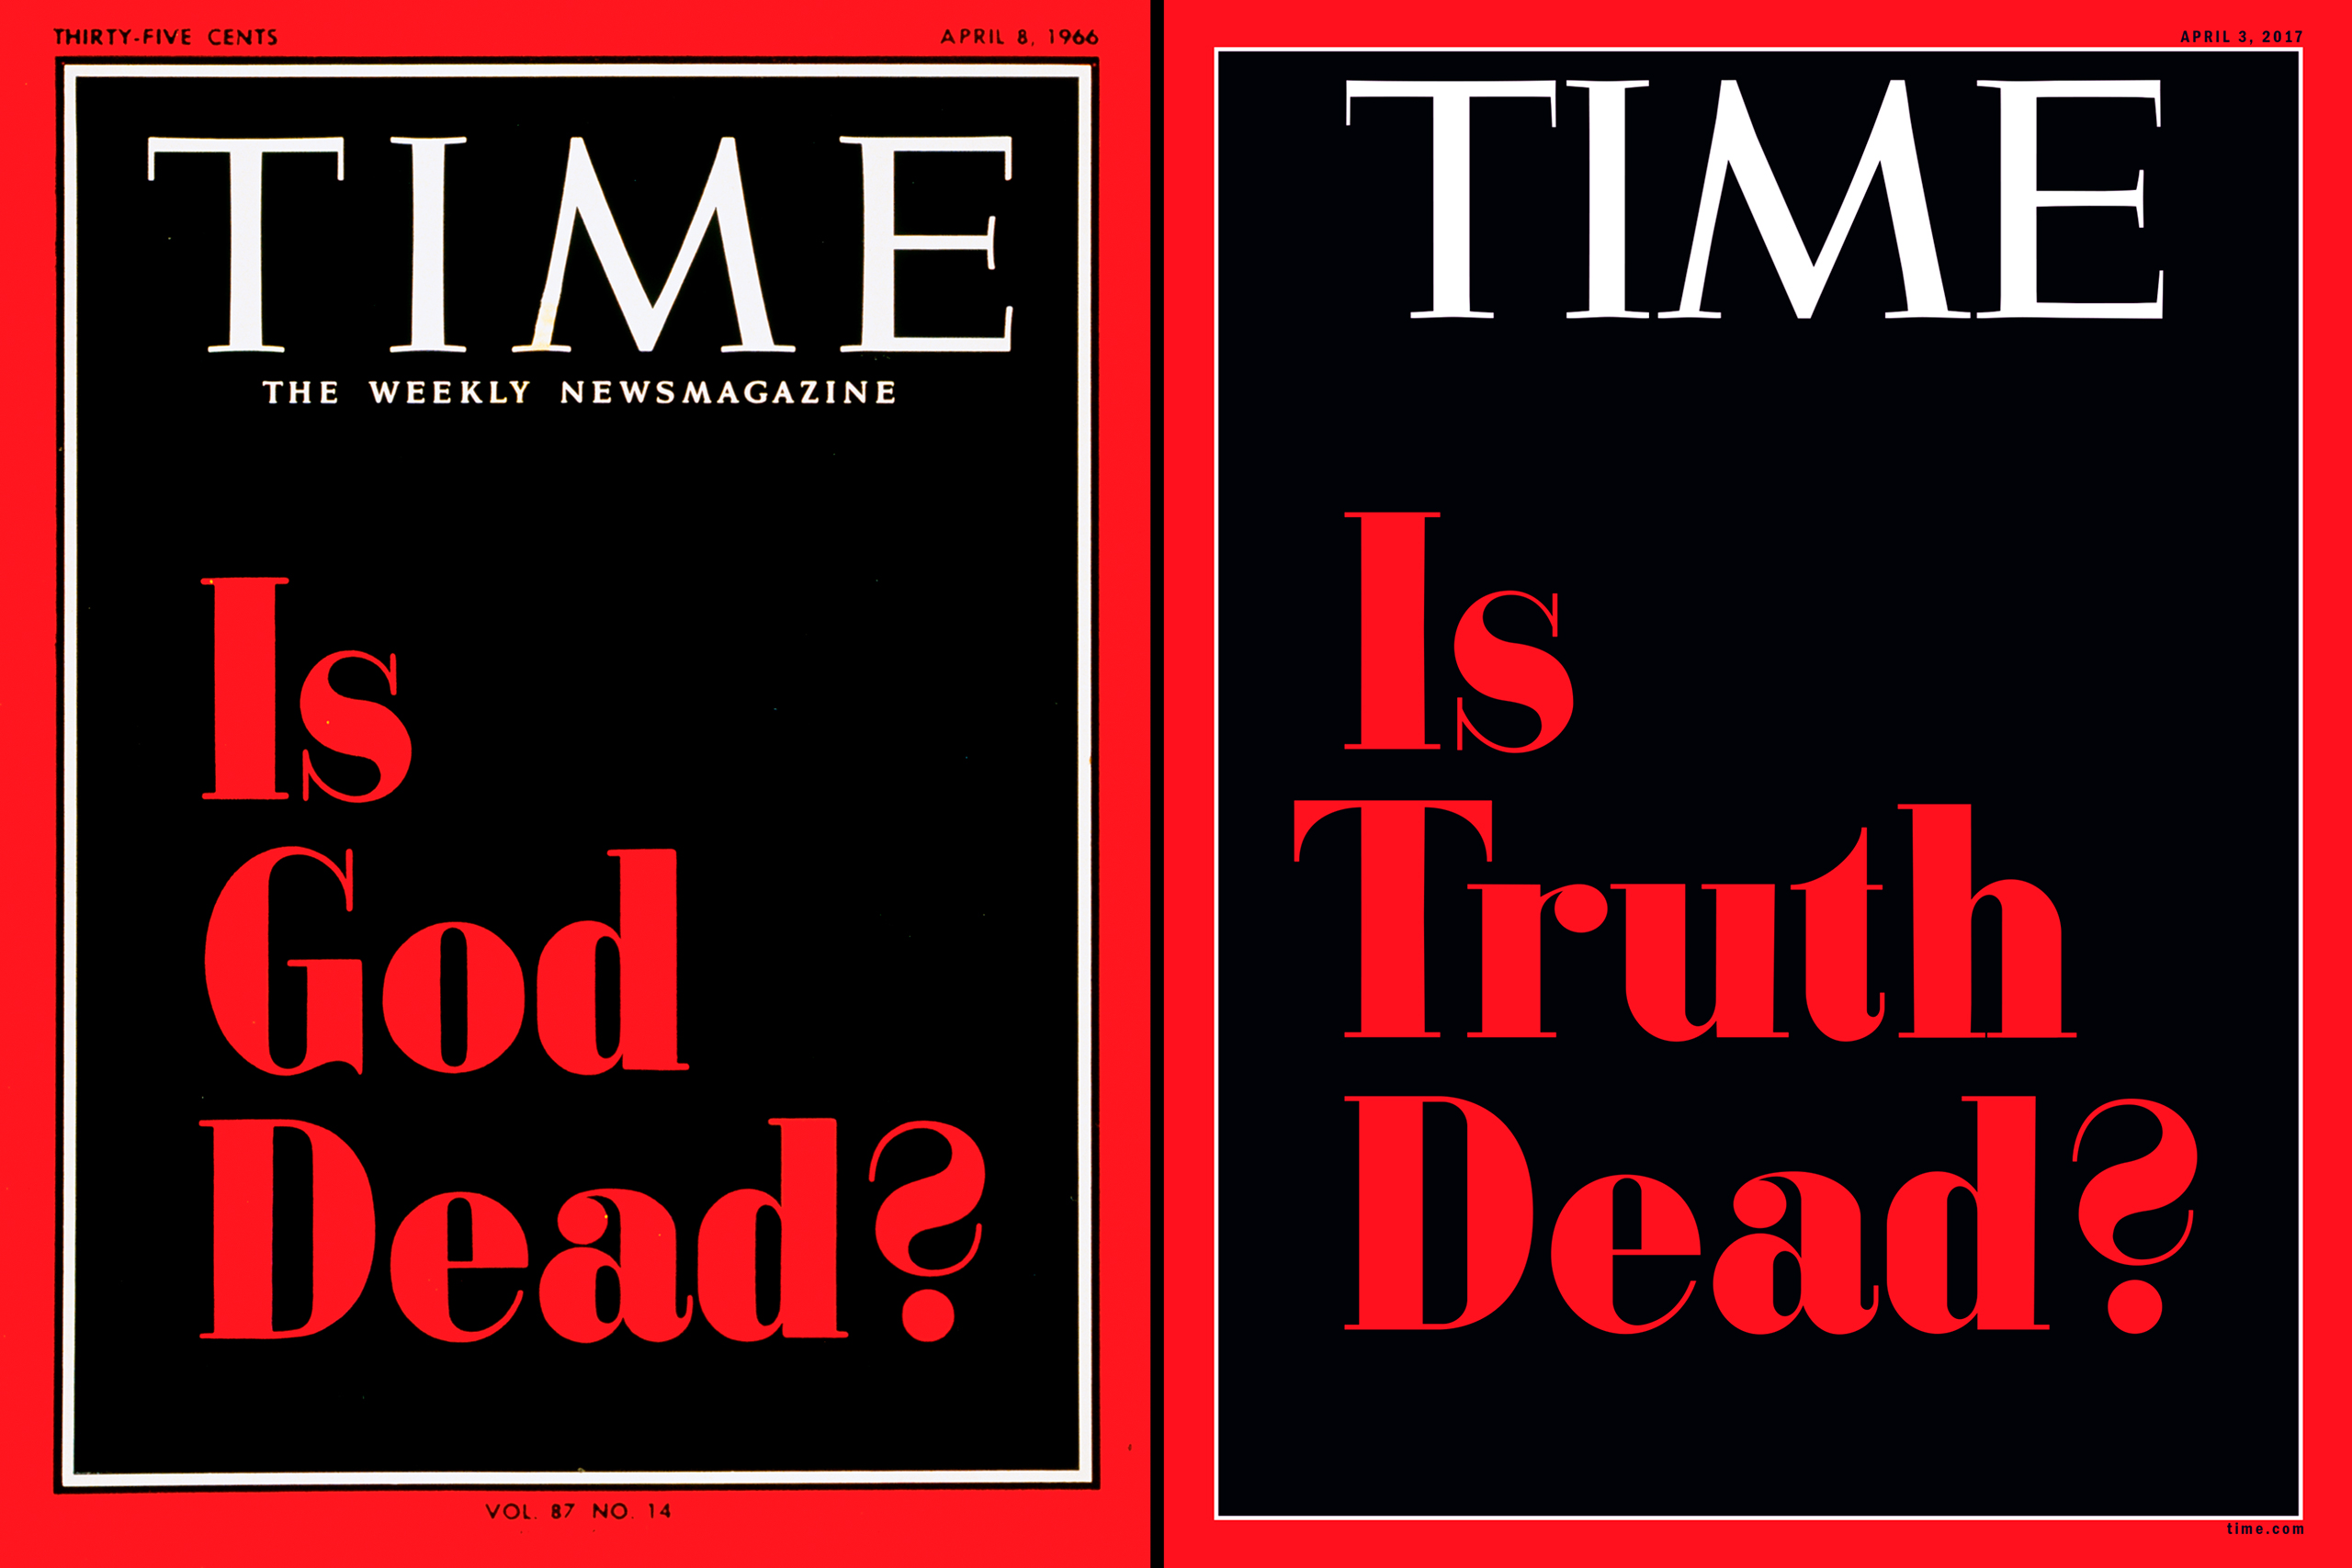 Donald Trump Truth: Behind 'Is Truth Dead?' Time Cover | Time